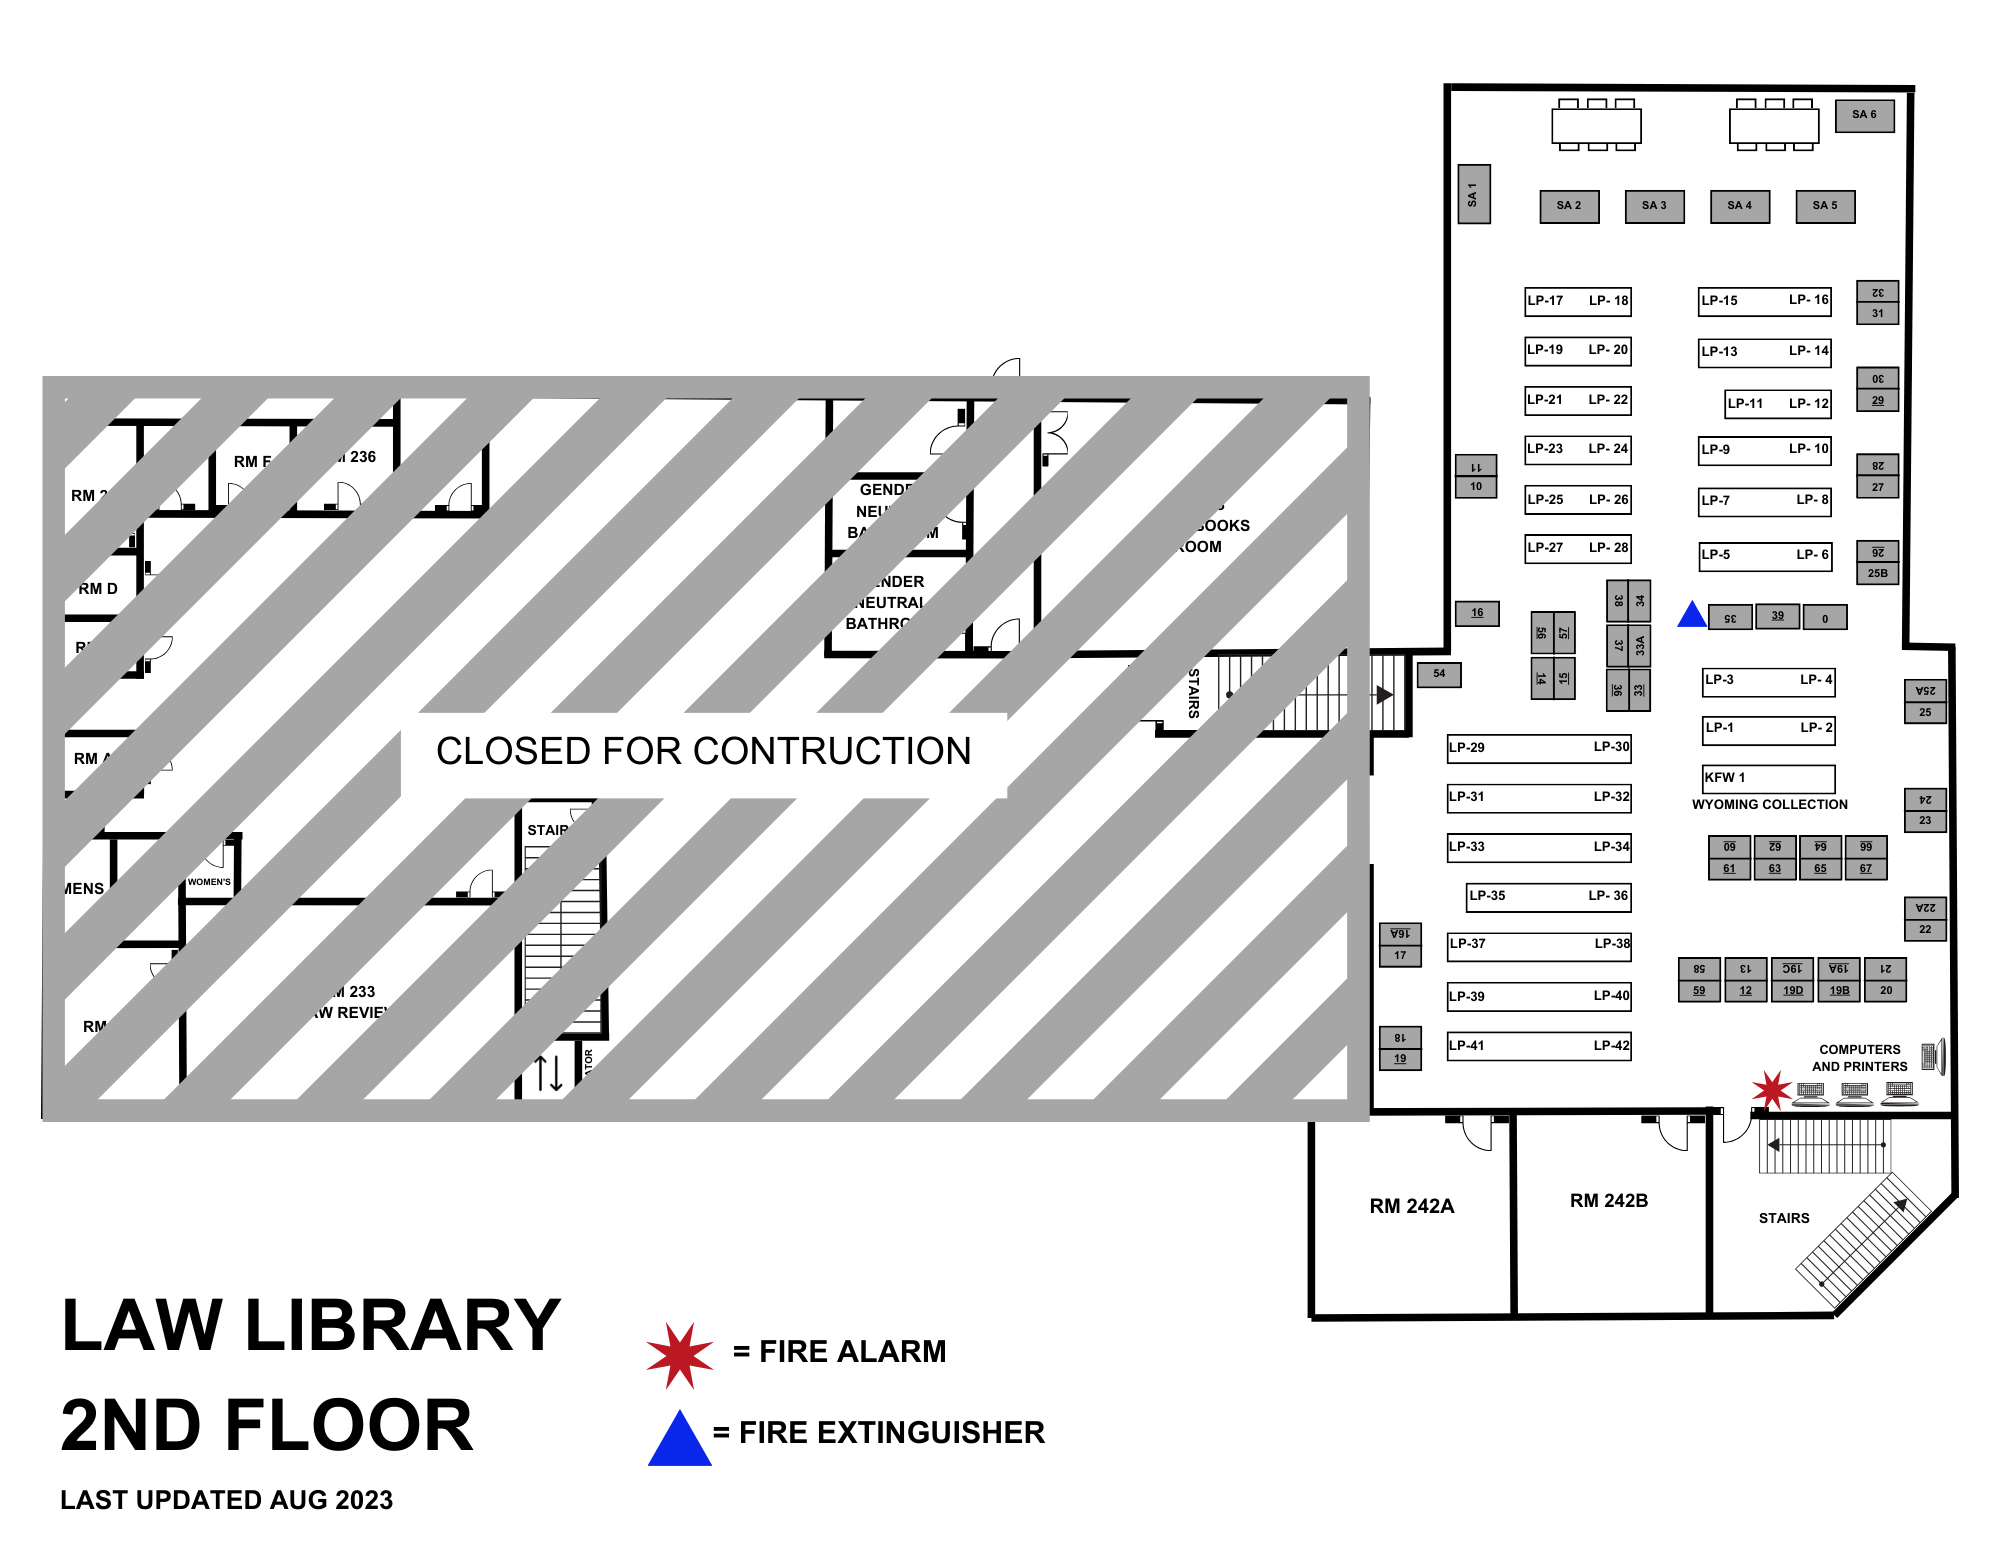 law library 2nd floor map